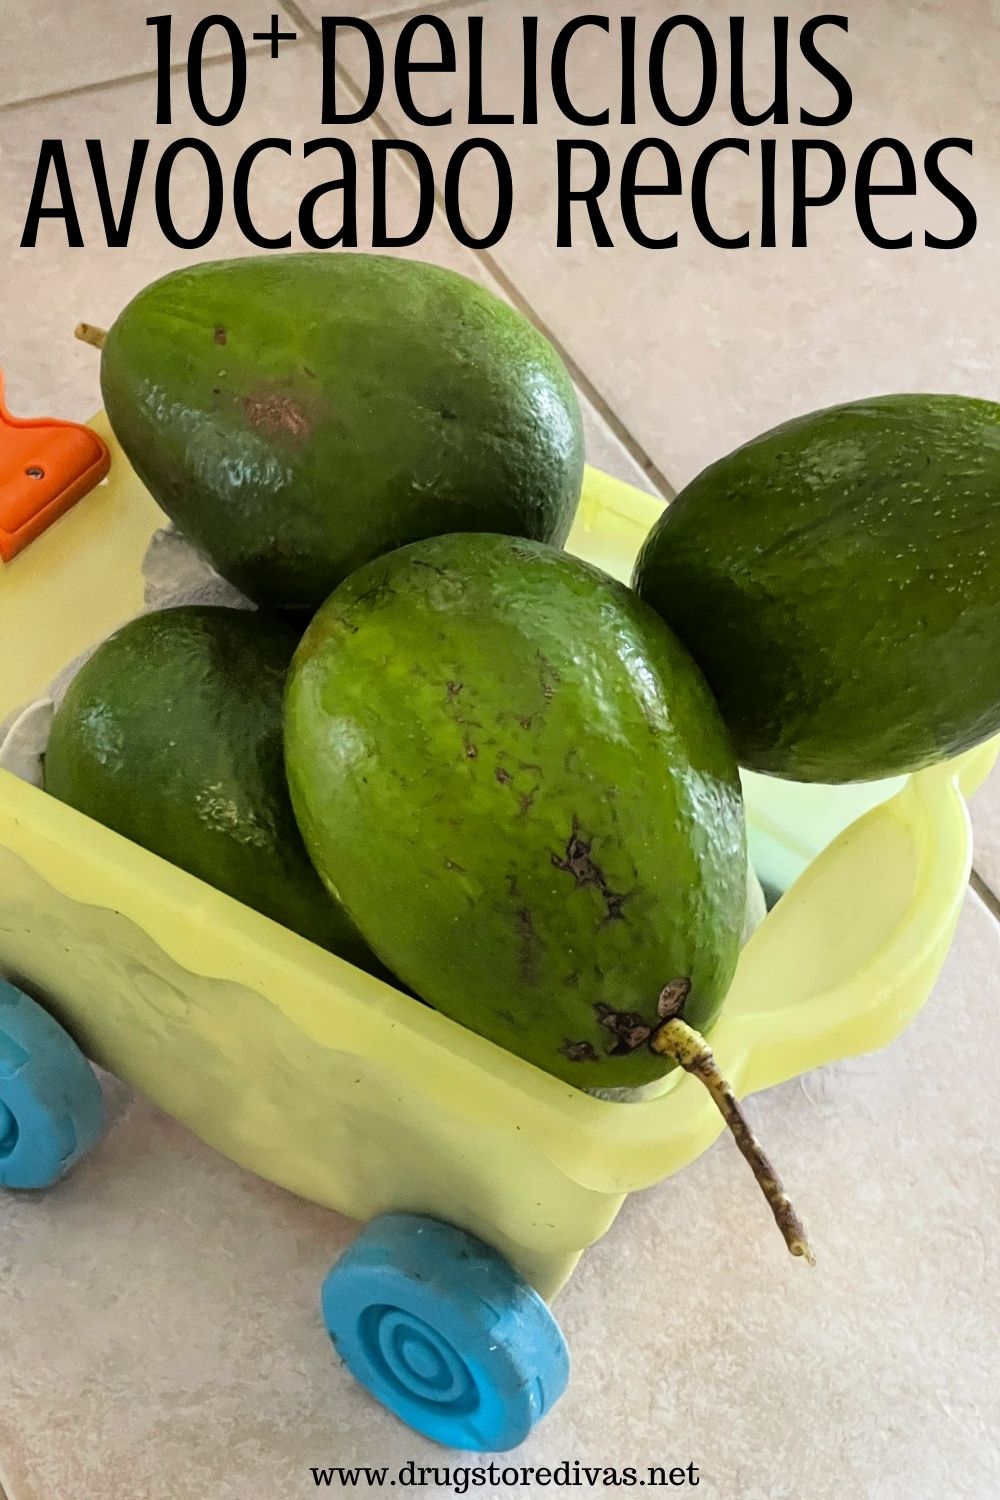 Avocados in a toy basket with the words 